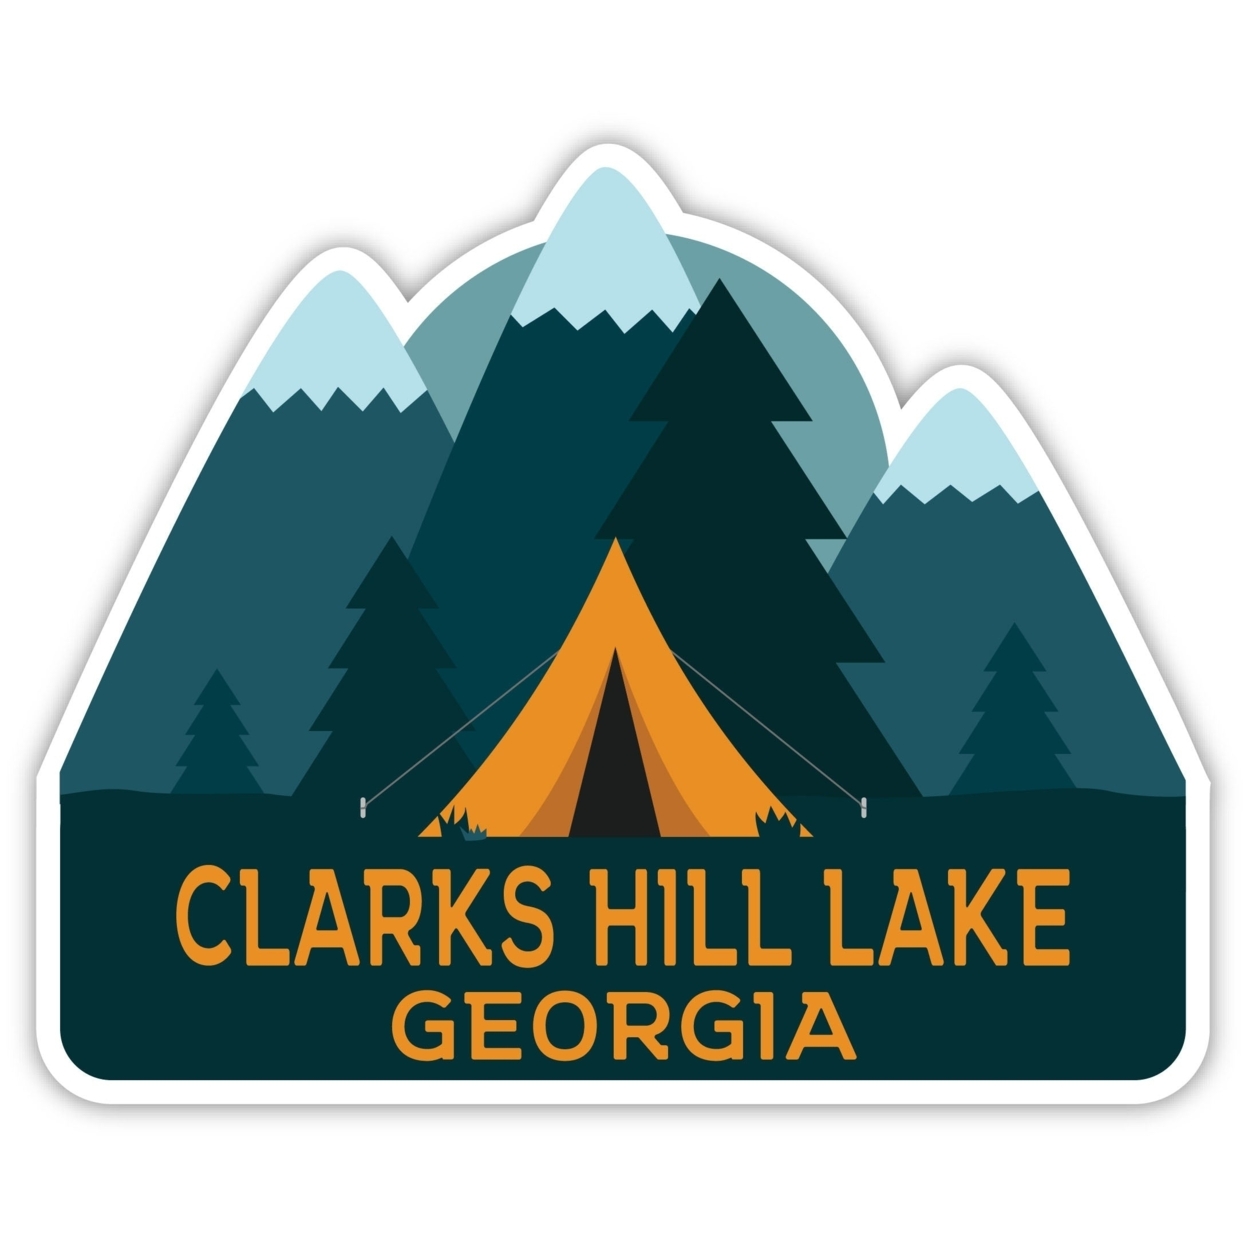 Clarks Hill Lake Georgia Souvenir Decorative Stickers (Choose Theme And Size) - 4-Pack, 2-Inch, Bear